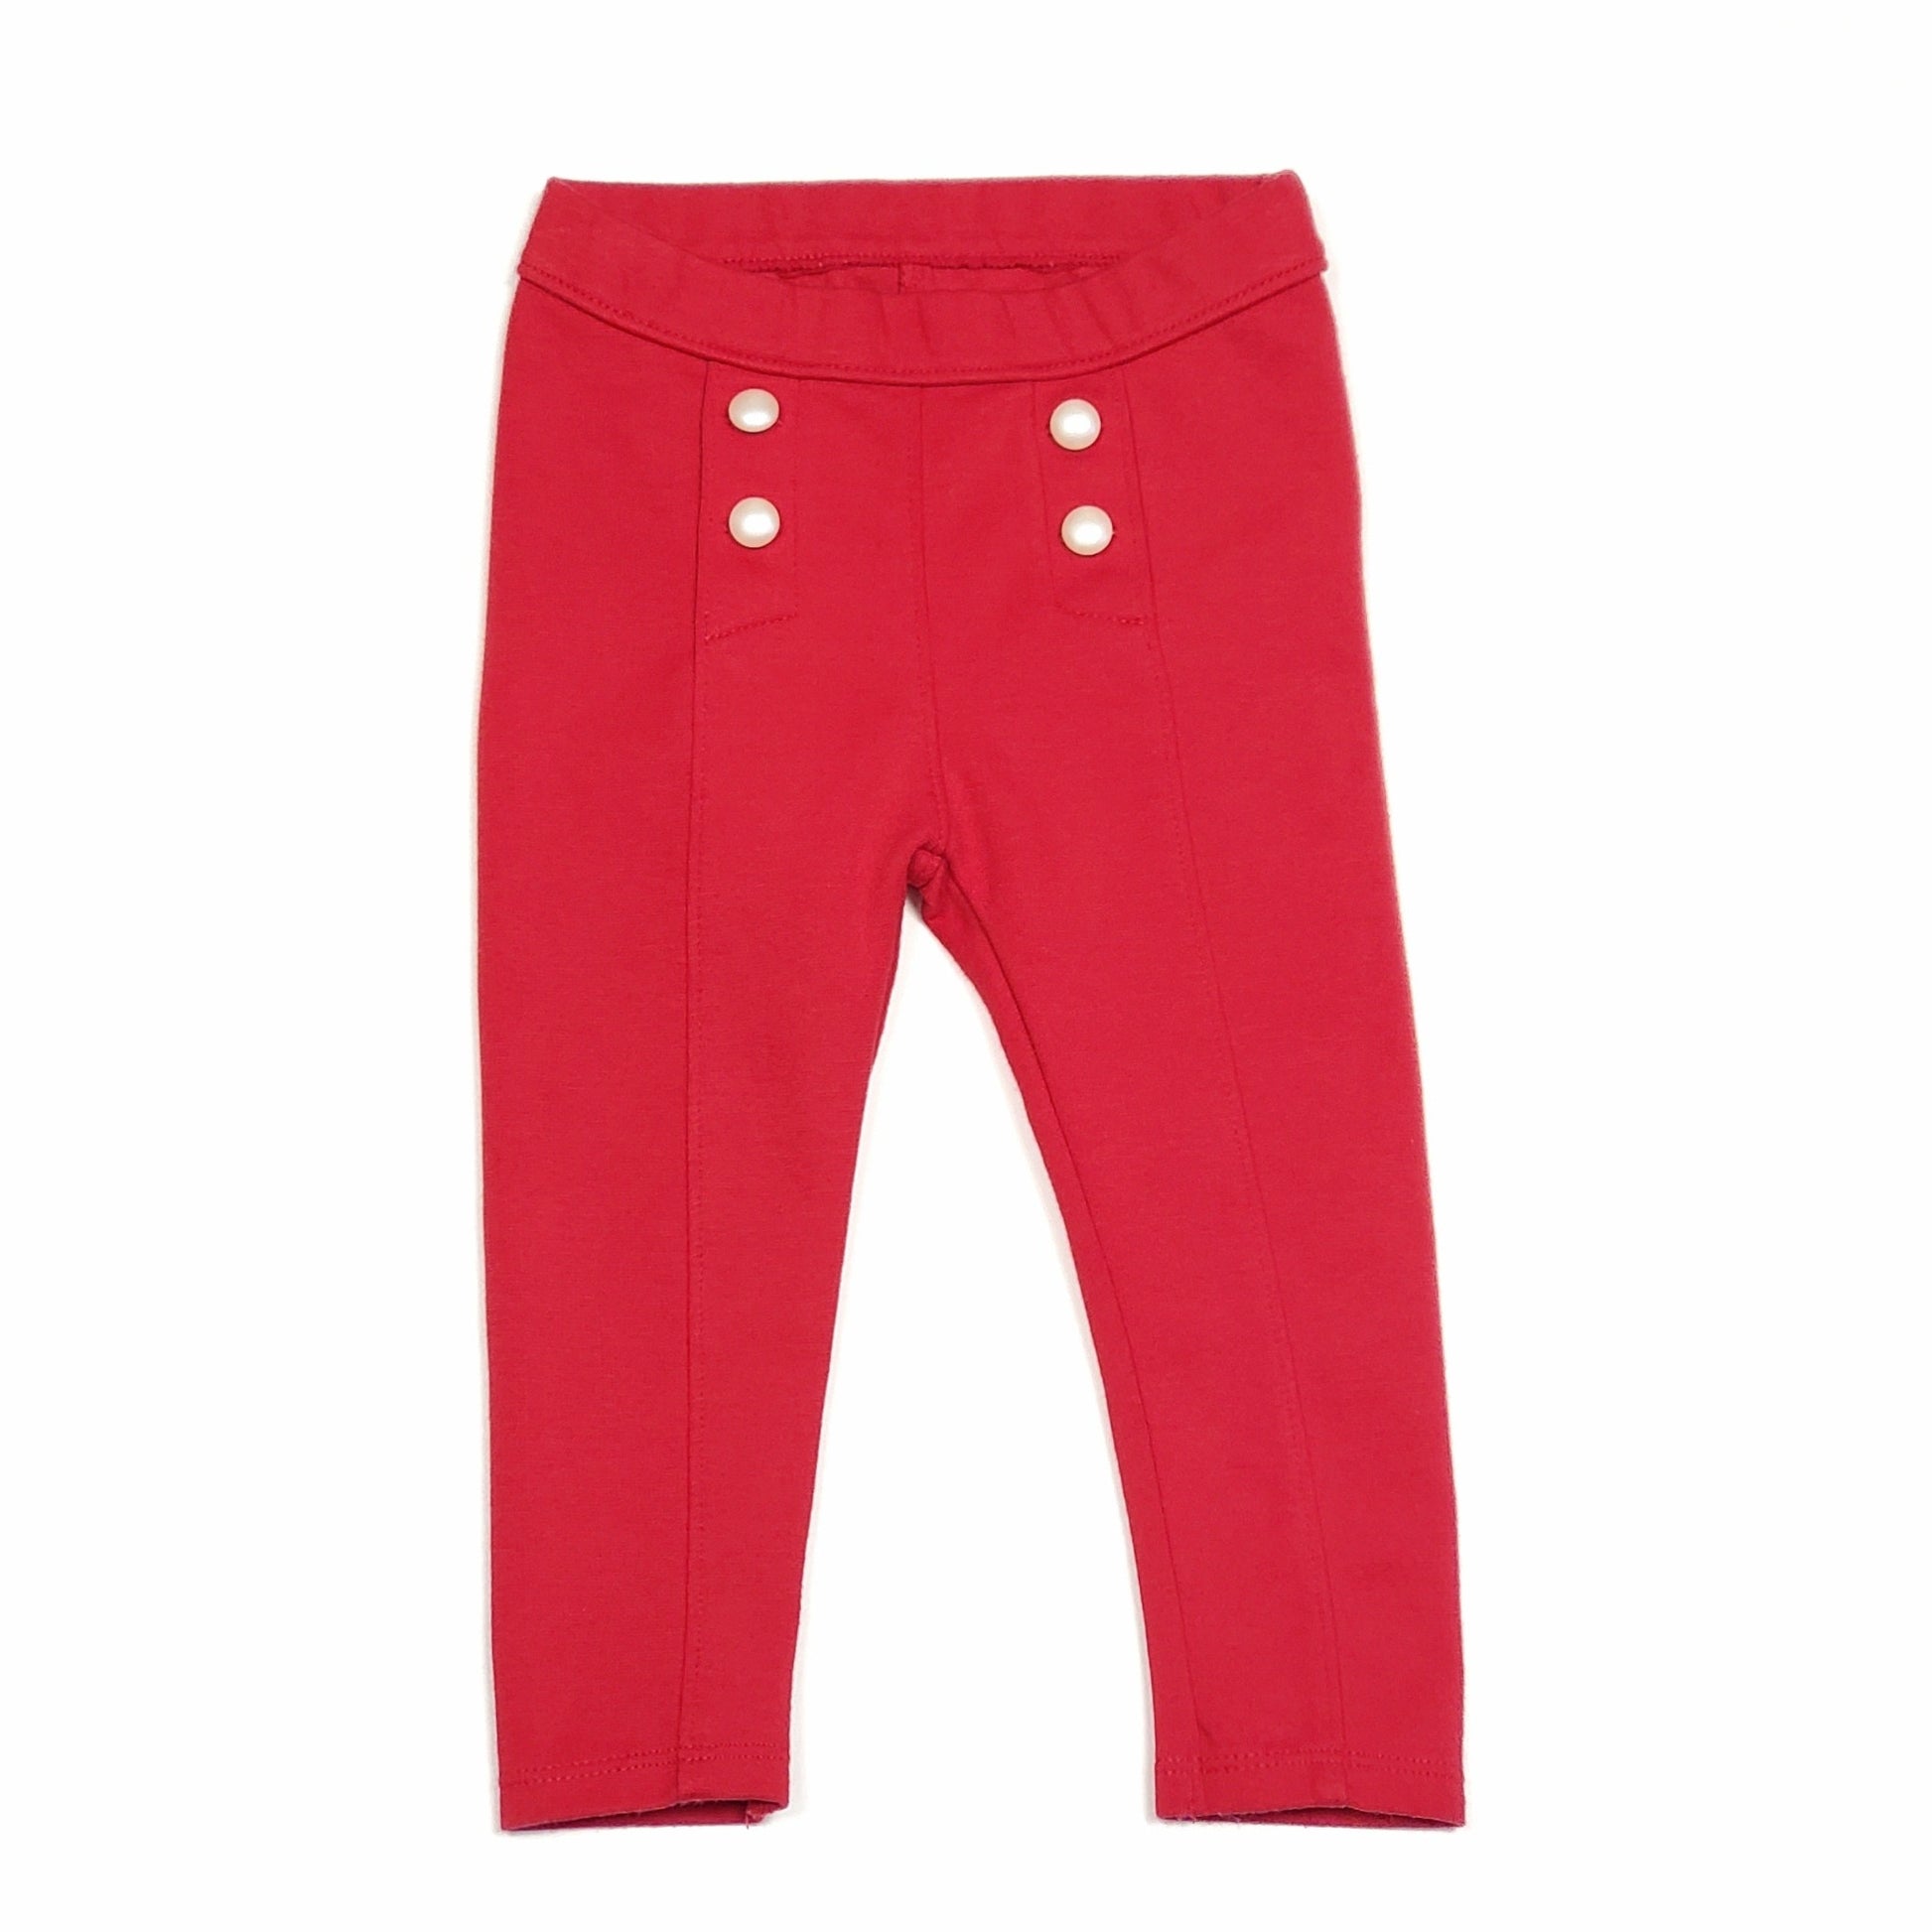 Janie and Jack Red Girls Ponte Pants 12M Used View 1